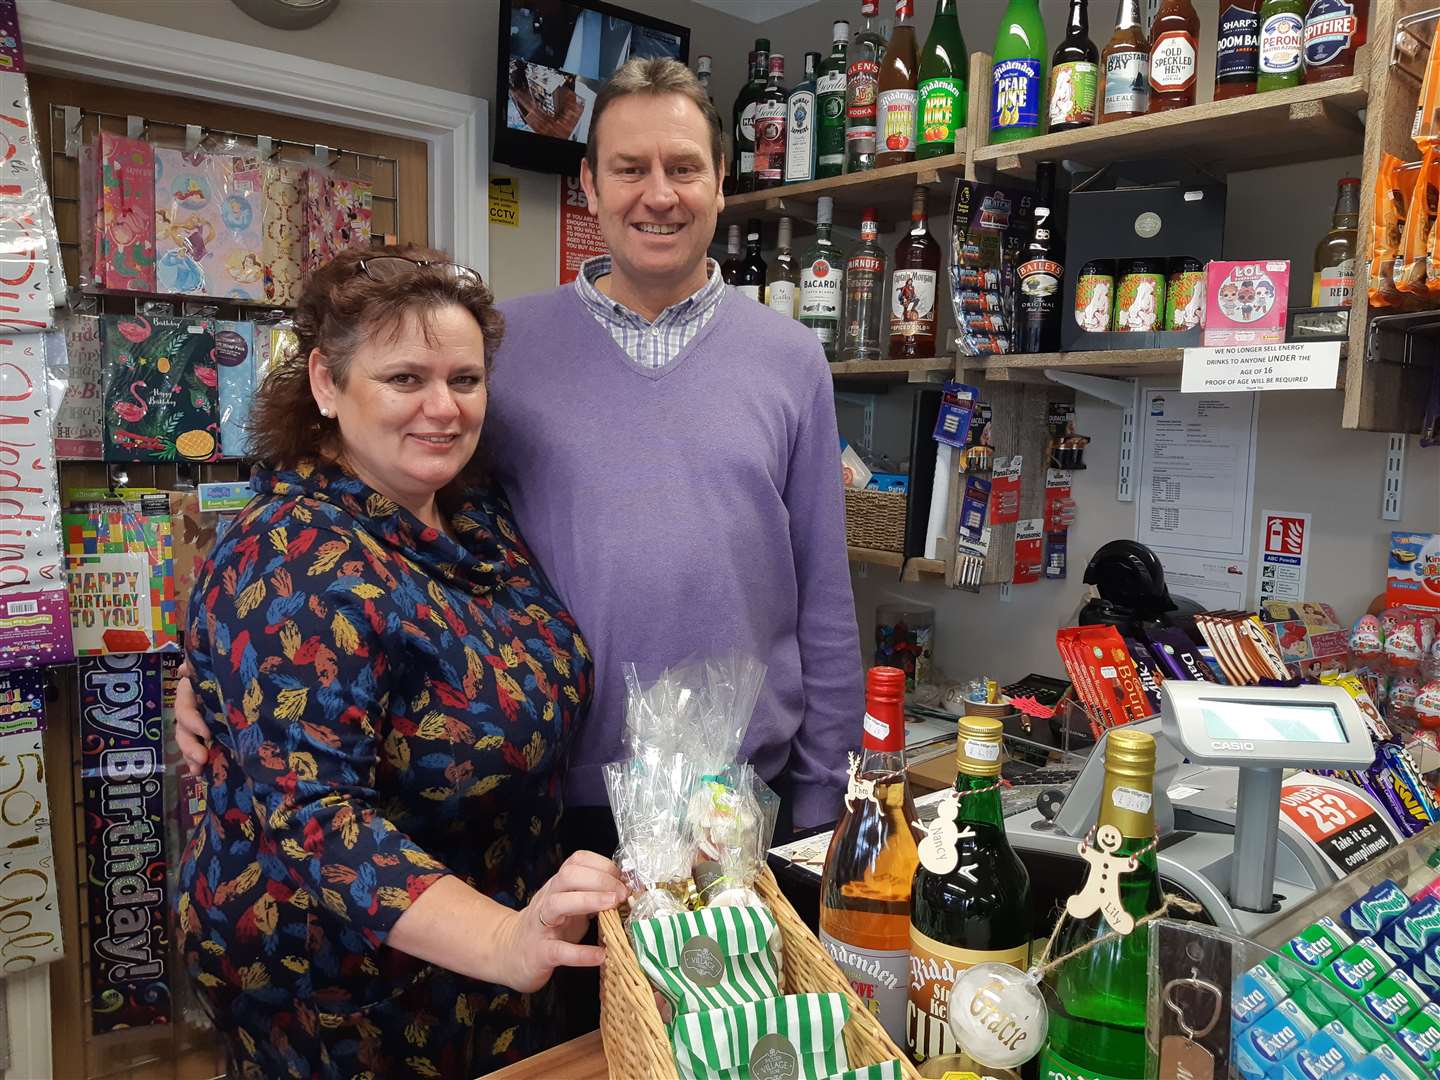 The idea came to Sholden Village Stores owner Sylvia Sims at 3am, she told her husband Martin and they got to work the next day